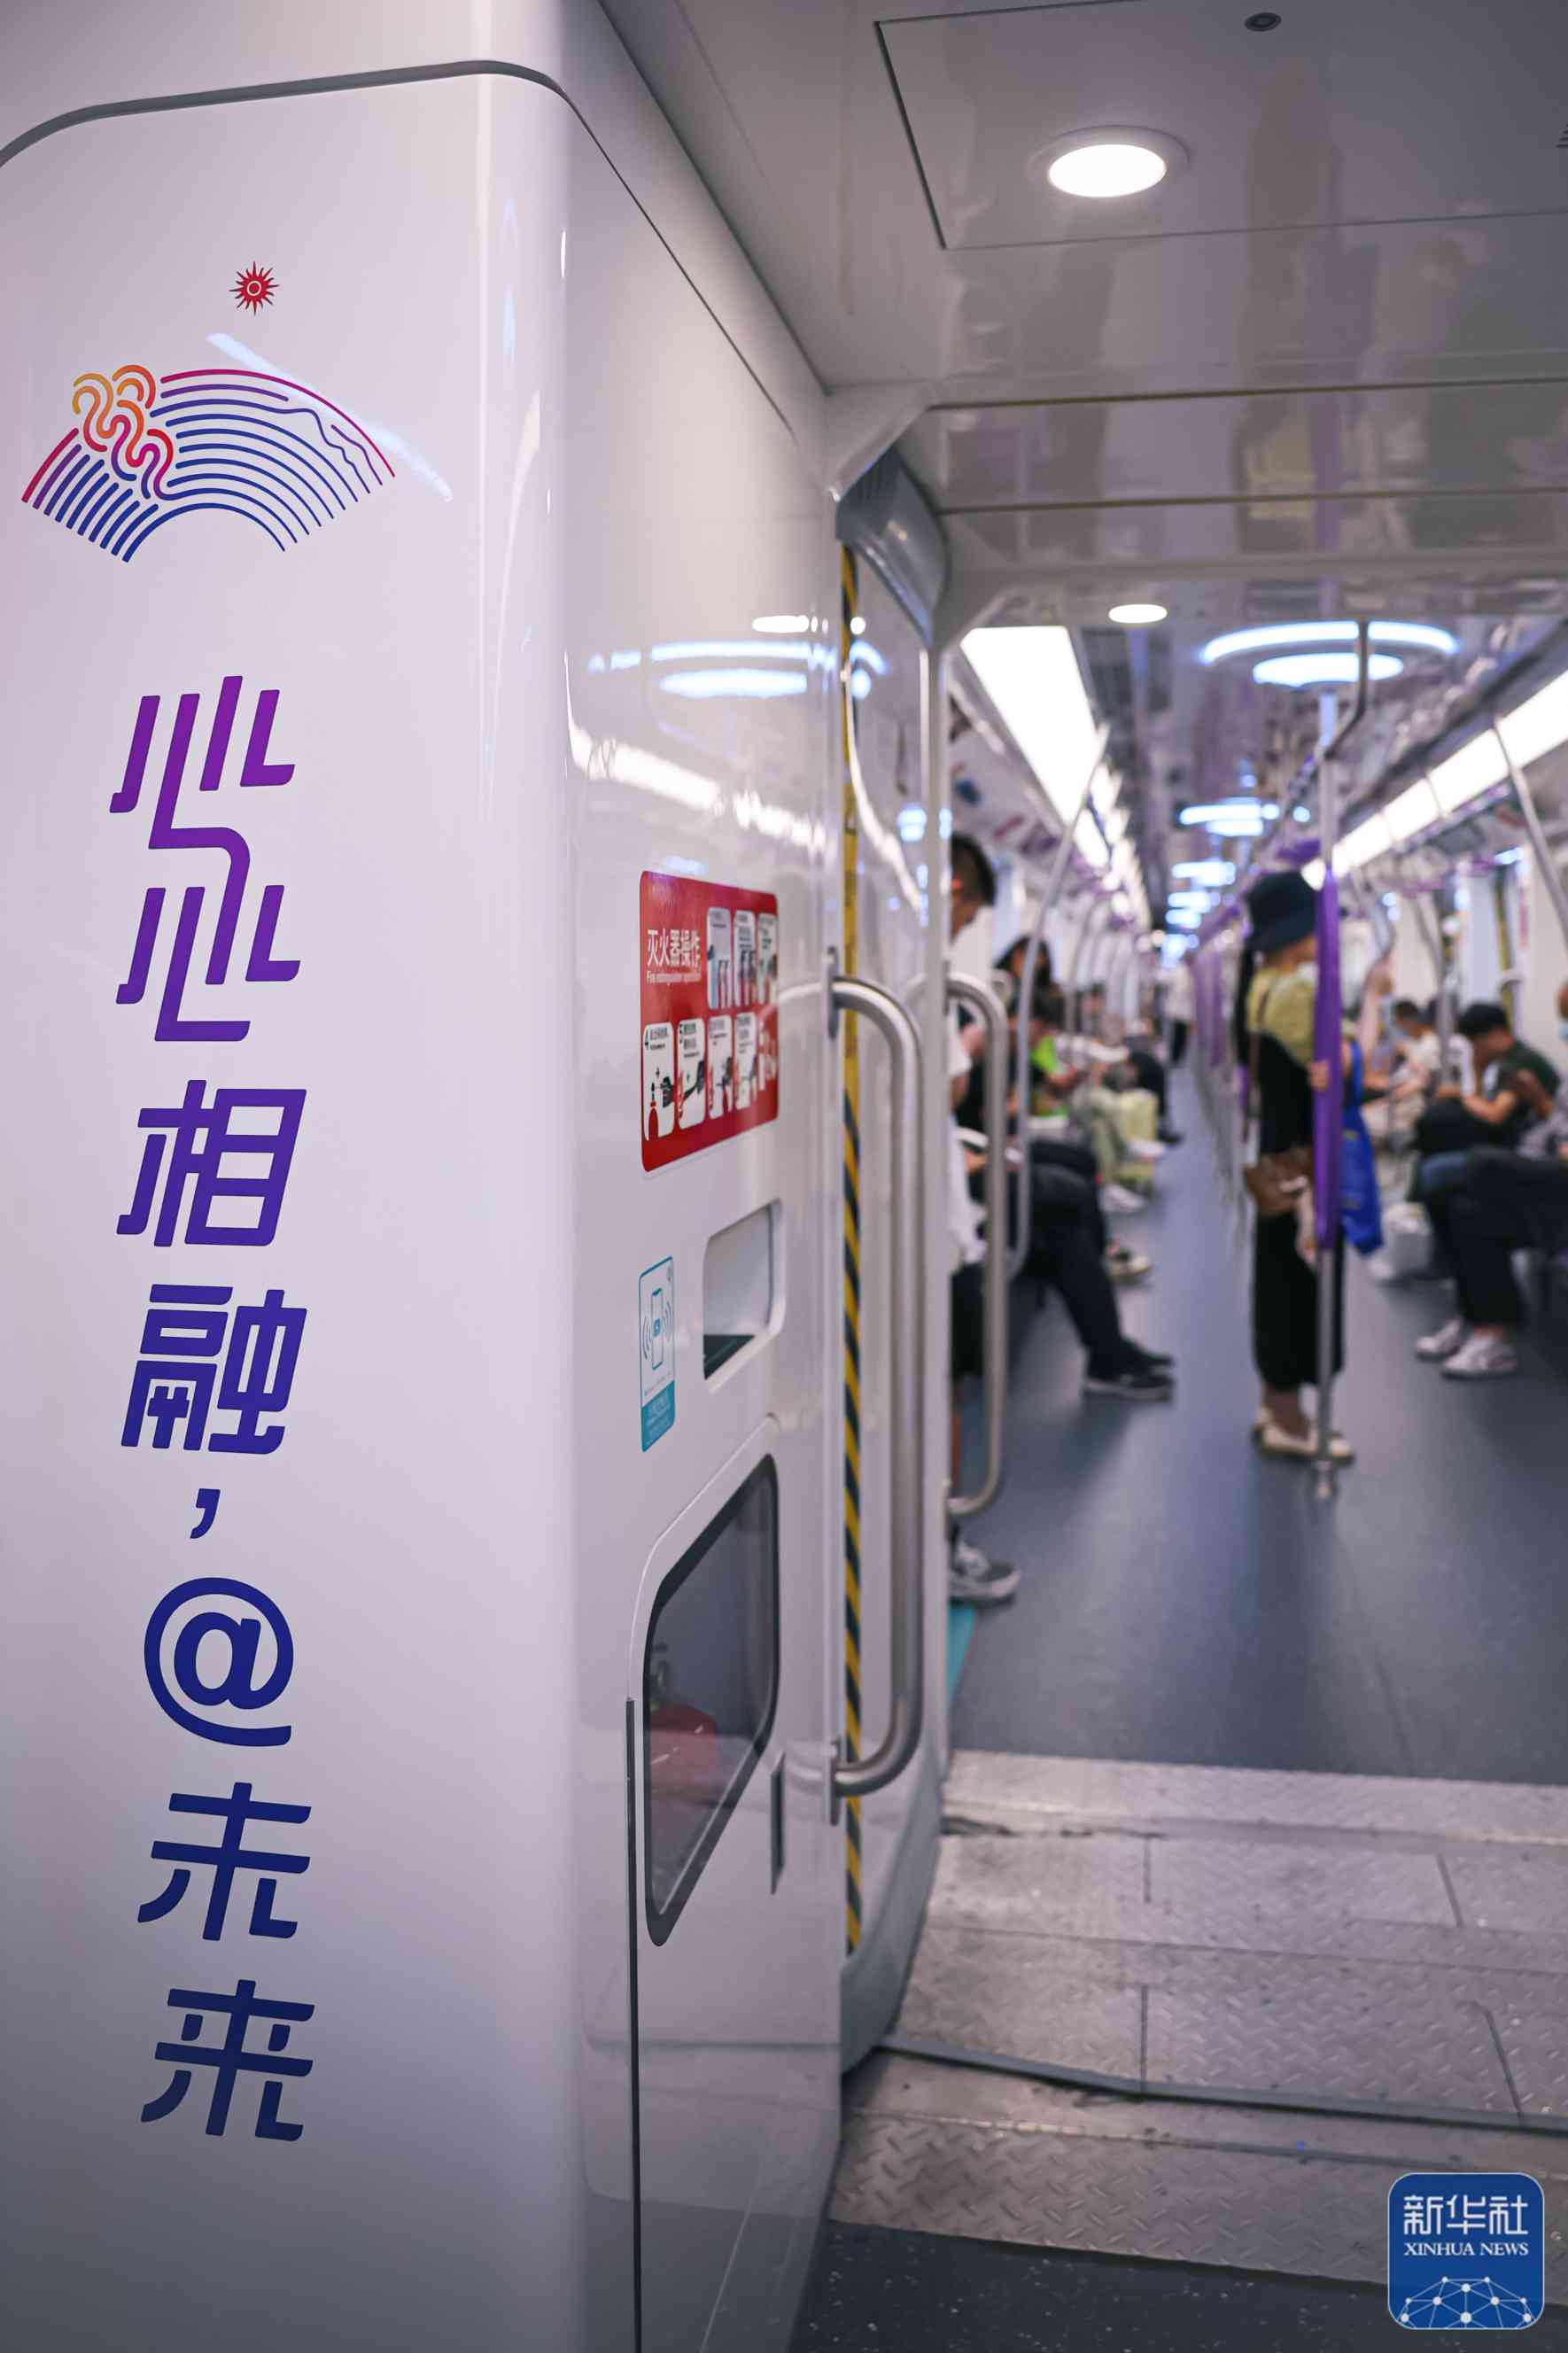 Check in on the Hangzhou Metro "Asian Games" special train